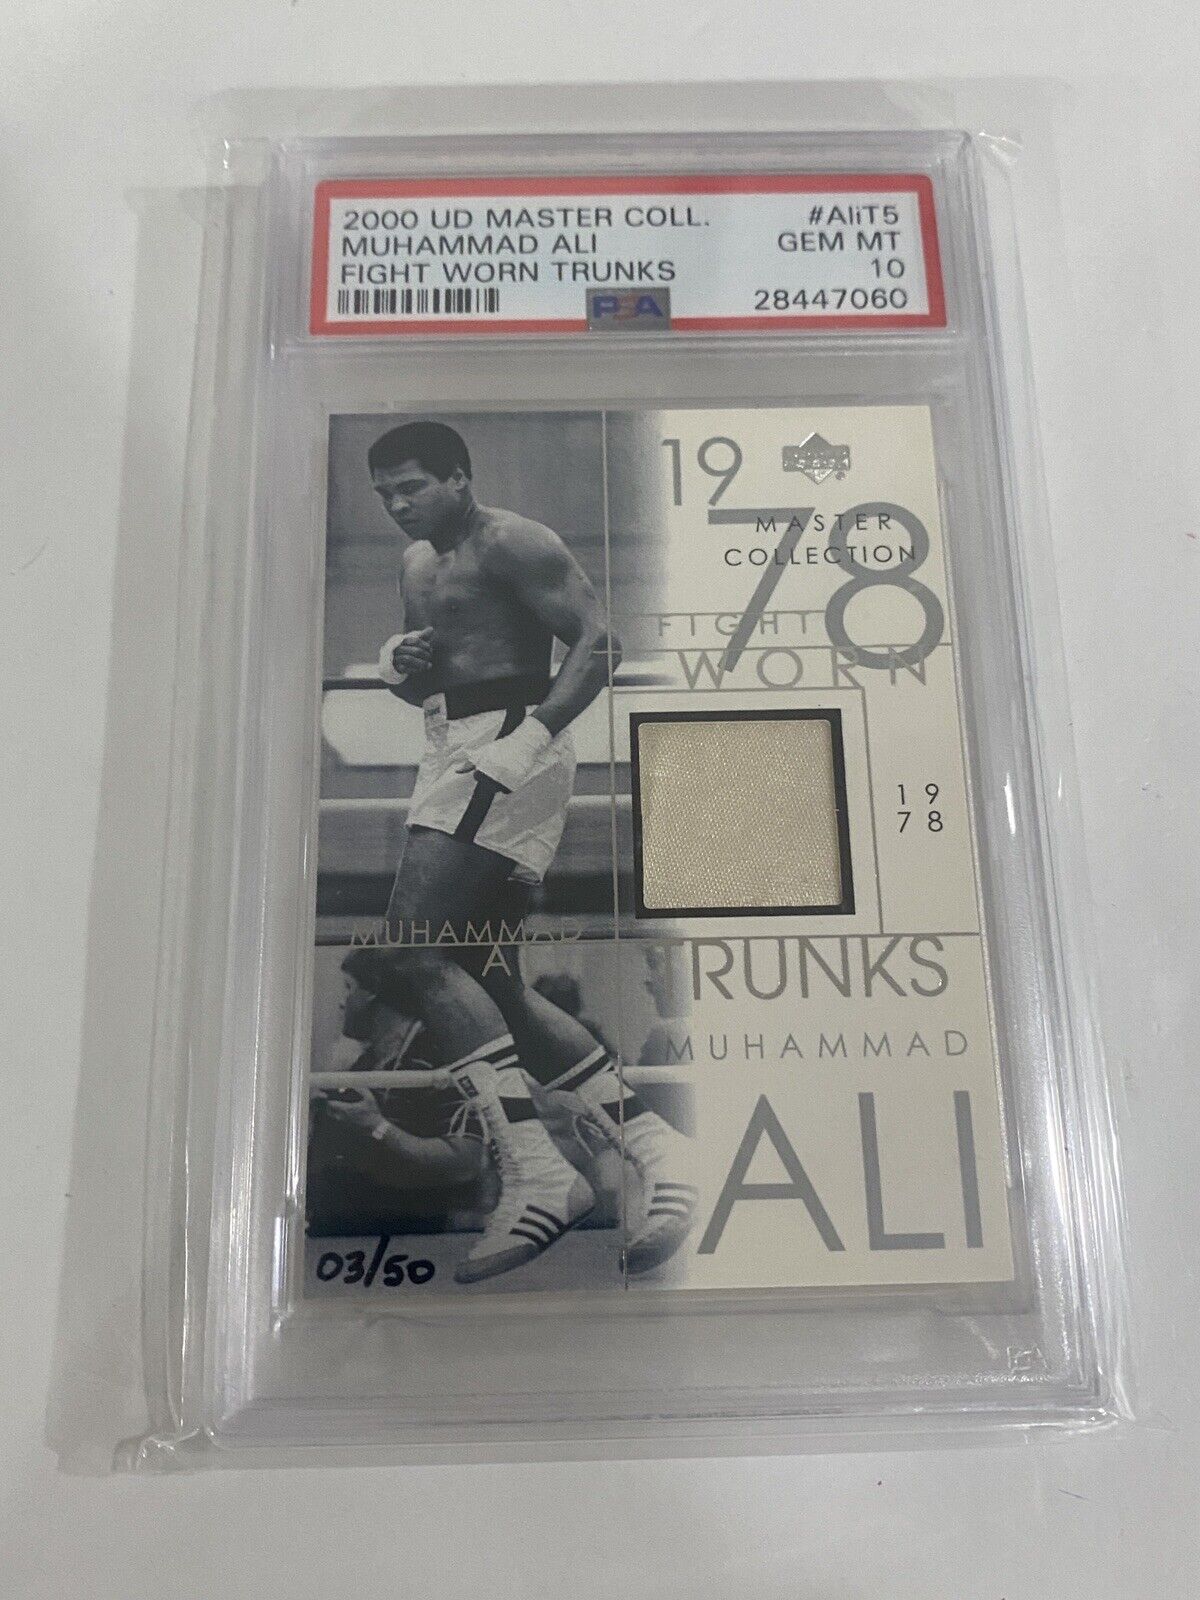 2000 UD Master Collection Muhammad Ali Fight Worn Trunks Card #/50 PSA 10 💎